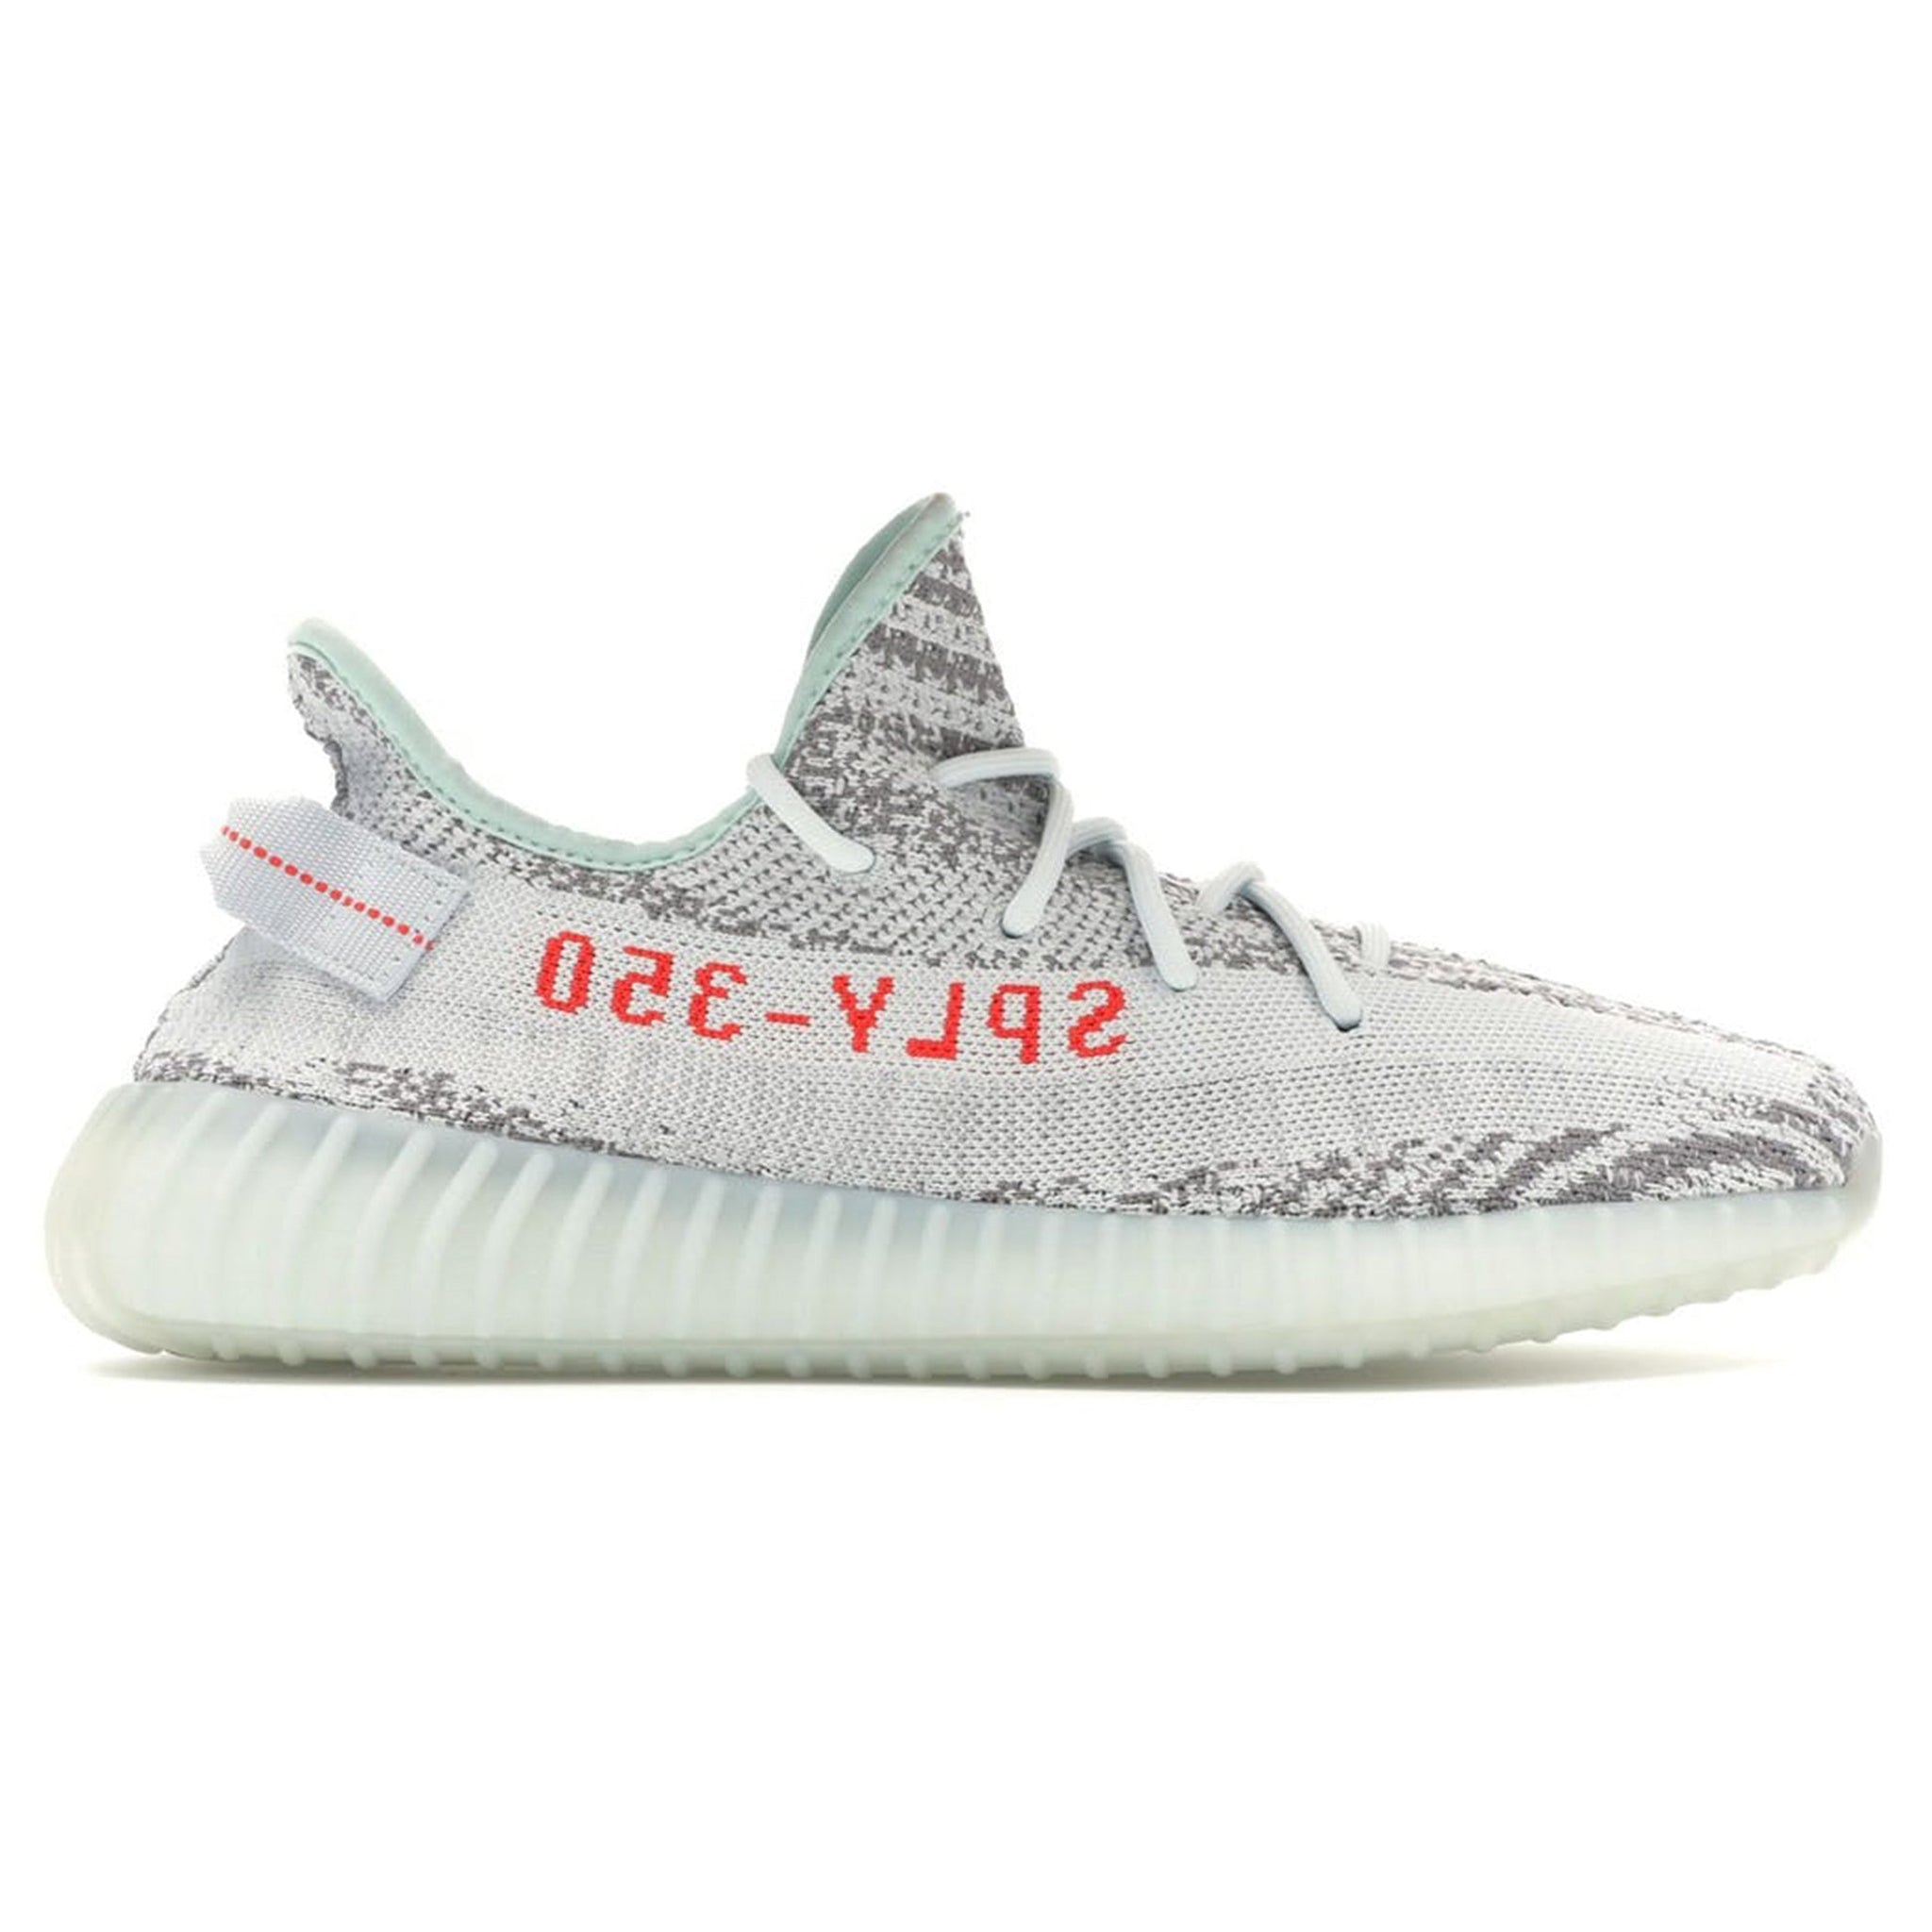 Image of Yeezy Boost 350 V2 Blue Tint